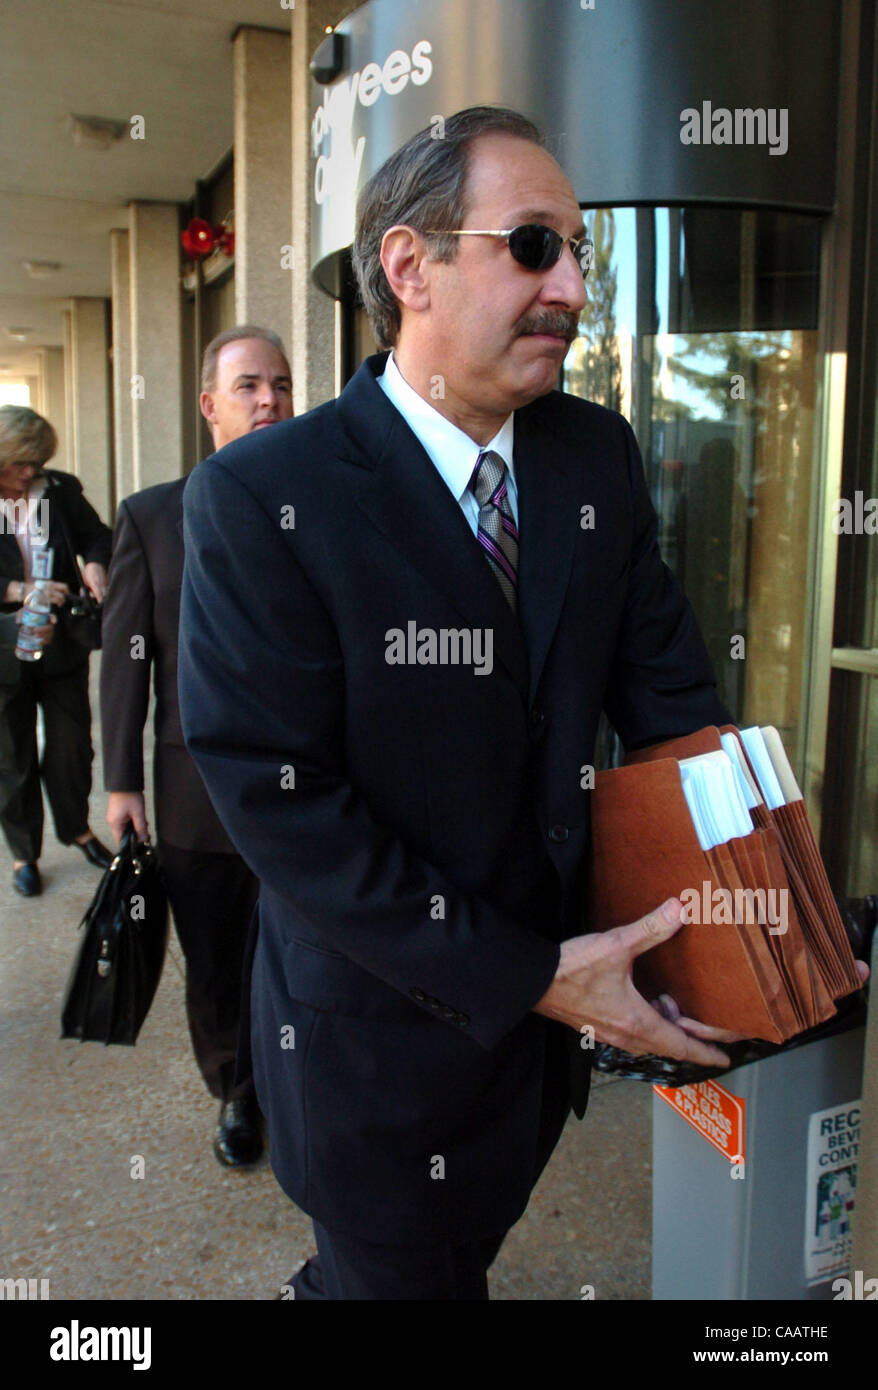 Scott Peterson's defense attorney Mark Geragos (cq) enters the San Mateo County Courthouse in Redwood City, Calif. on Monday, February 9, 2004. A date for the start of the trial as well as other pre-trial issues are due to be discussed on this court day. Peterson is accused of killing wife, Laci, an Stock Photo